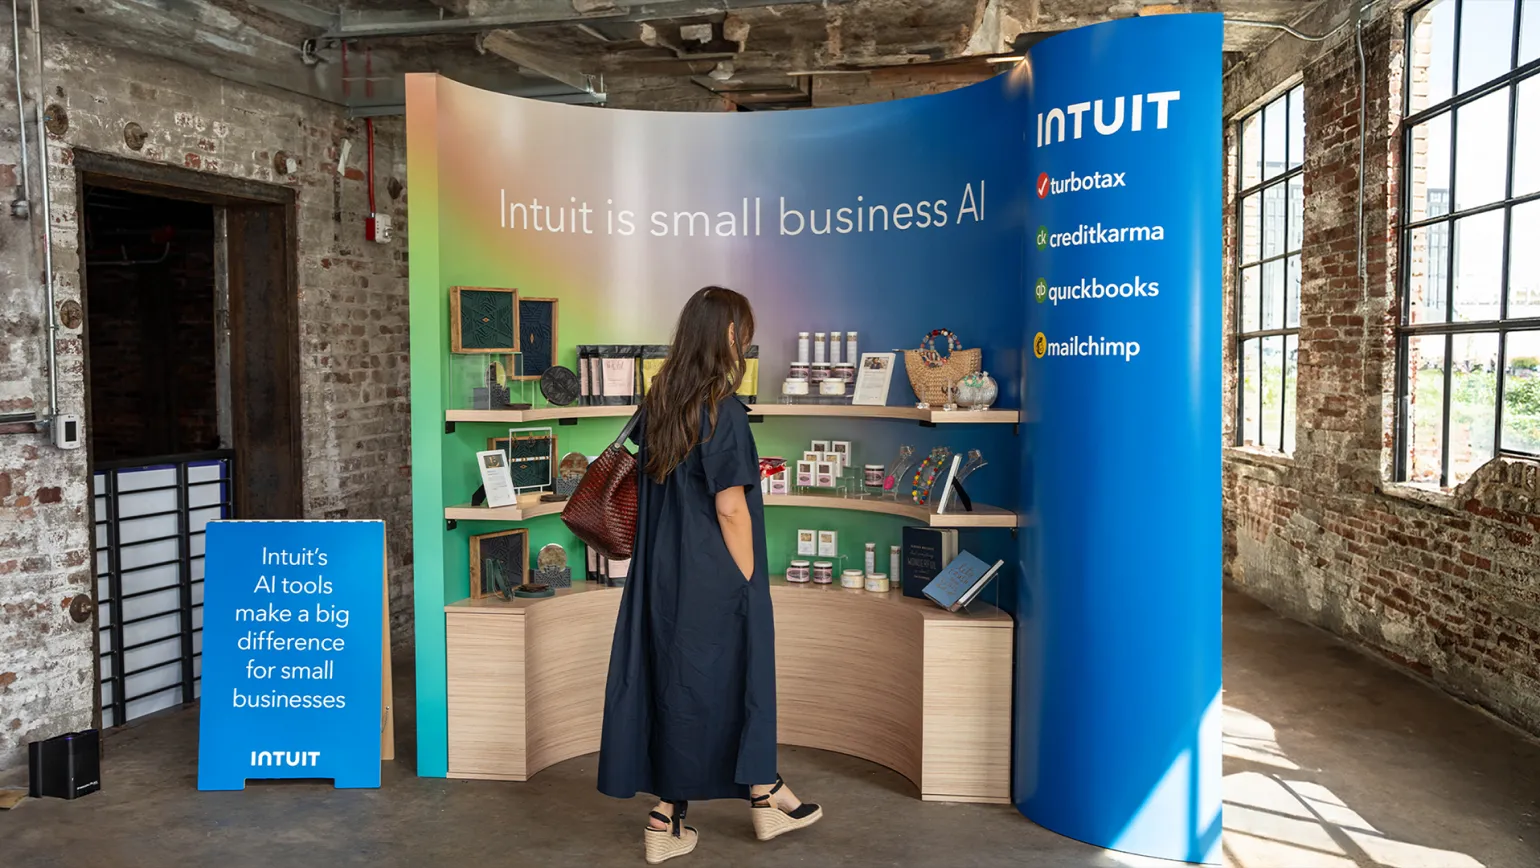 A woman in a black dress stands in front of a curved display booth showcasing AI tools for small businesses. The booth features labels for various Intuit products, including Turbotax, CreditKarma, QuickBooks, and Mailchimp, with shelves of products and decor.